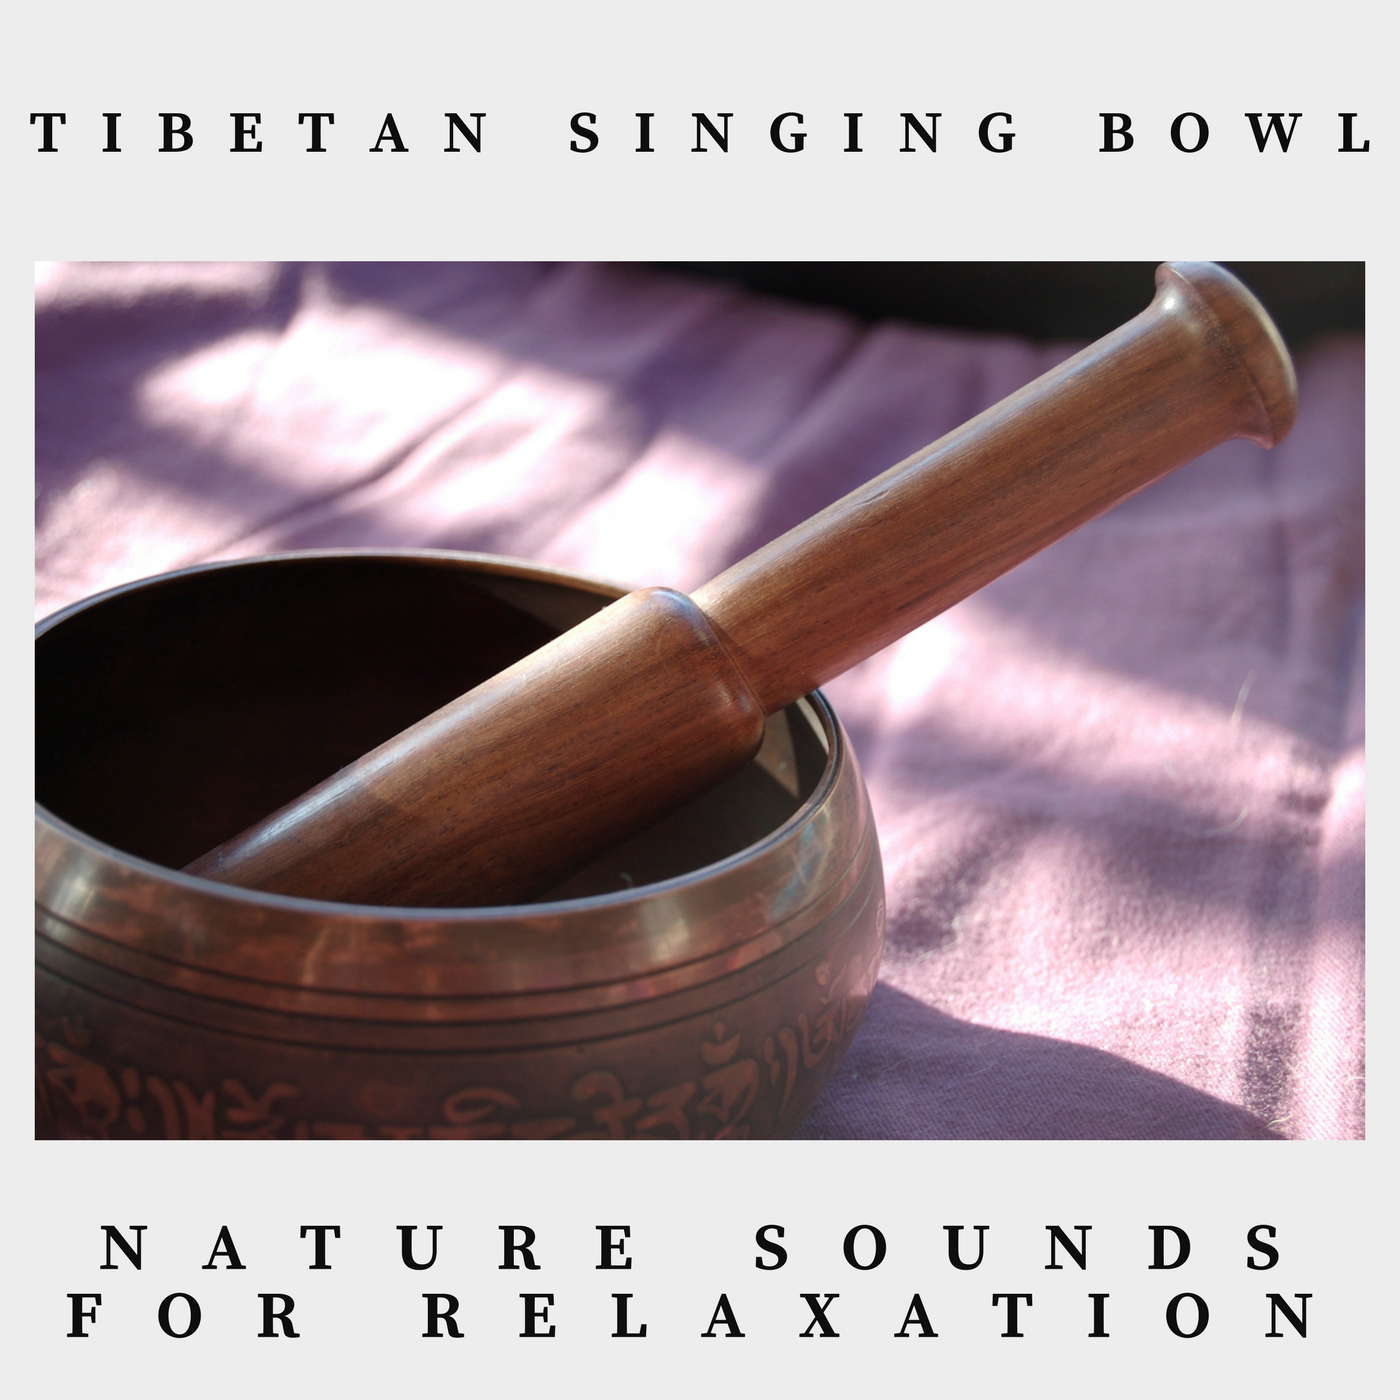 Tibetan Singing Bowl For Relaxation: One